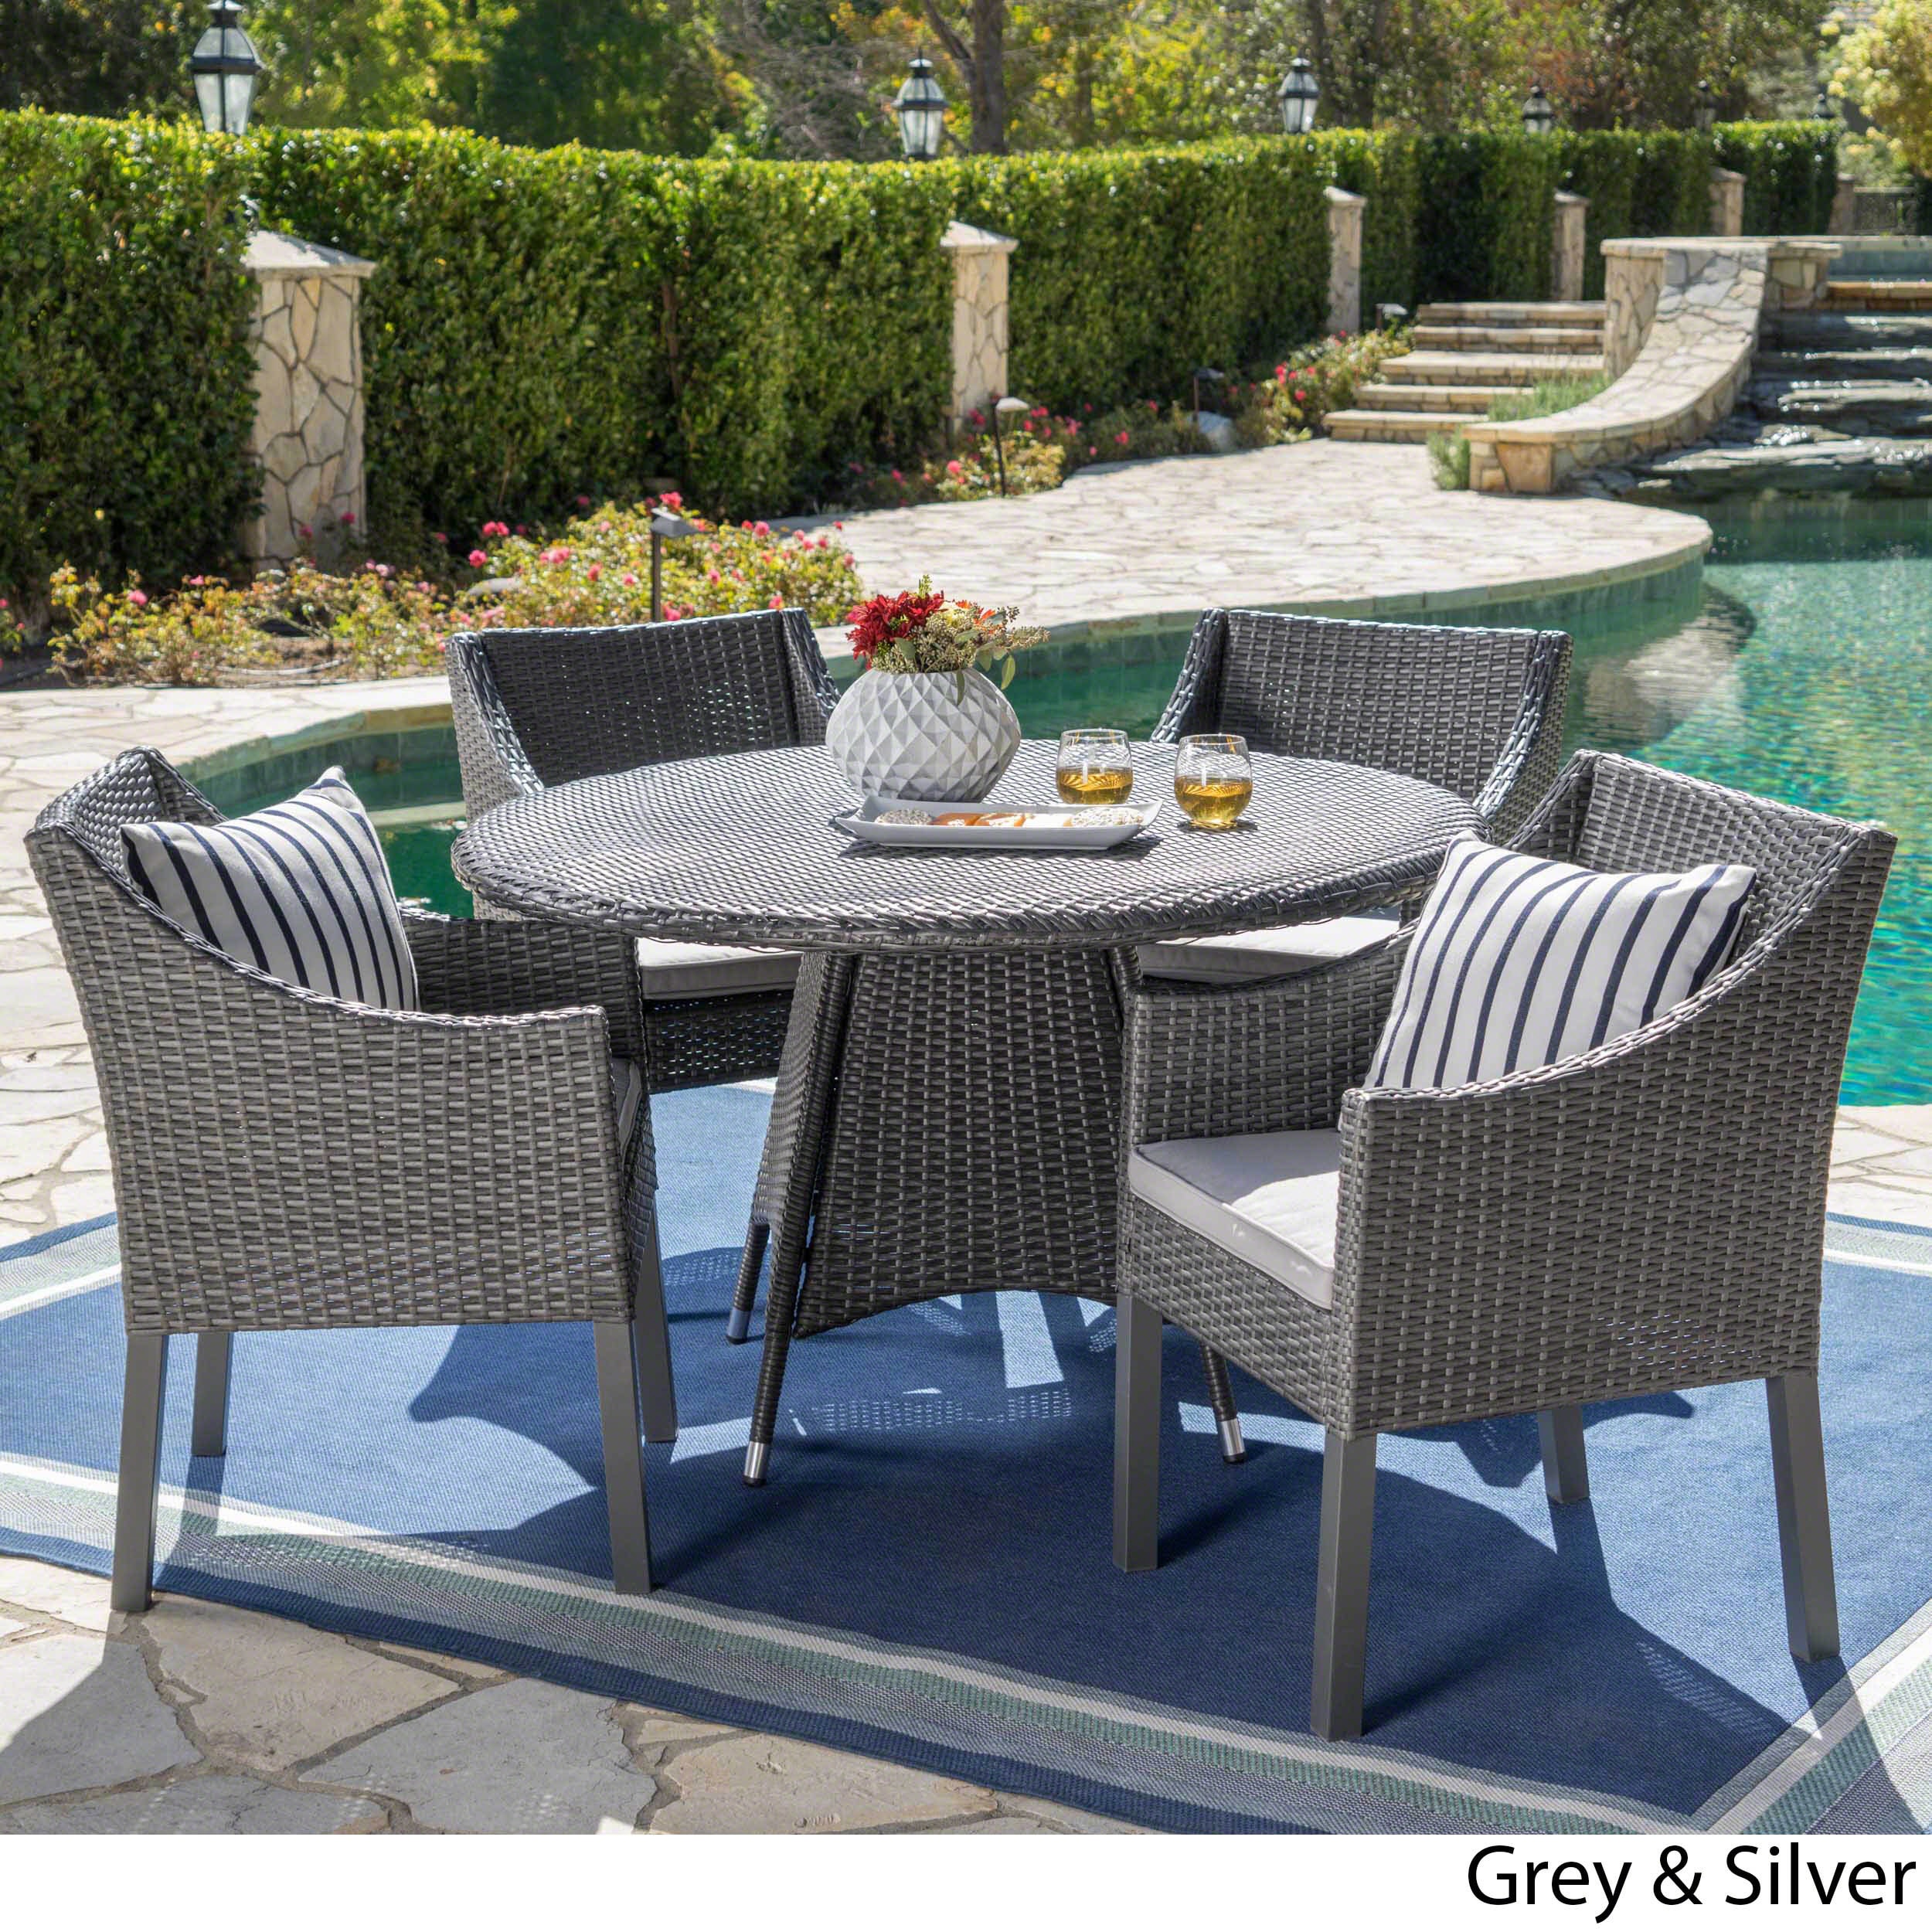 Patio Table And Chairs With Umbrella Hole / Outdoor Table Chair With